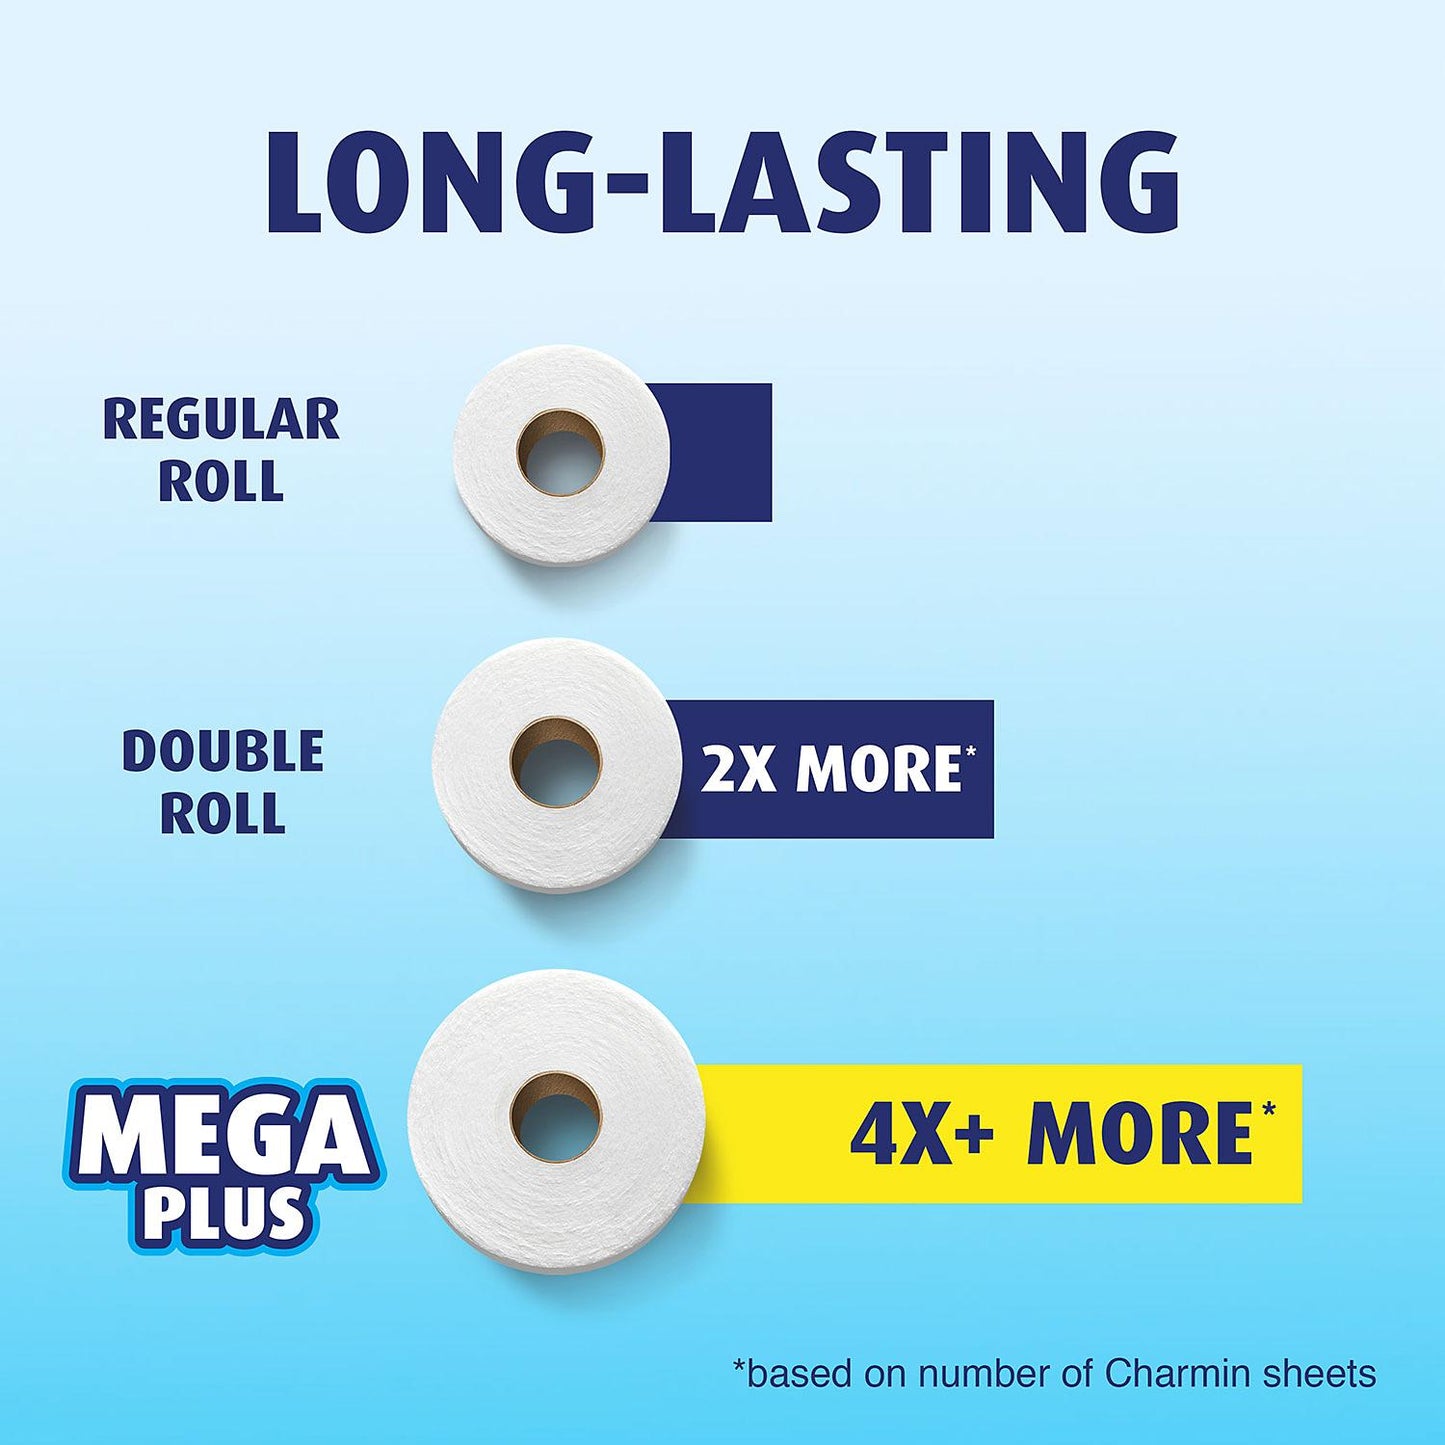 Charmin Ultra Strong Mega Roll Toilet Paper, 32 ct.